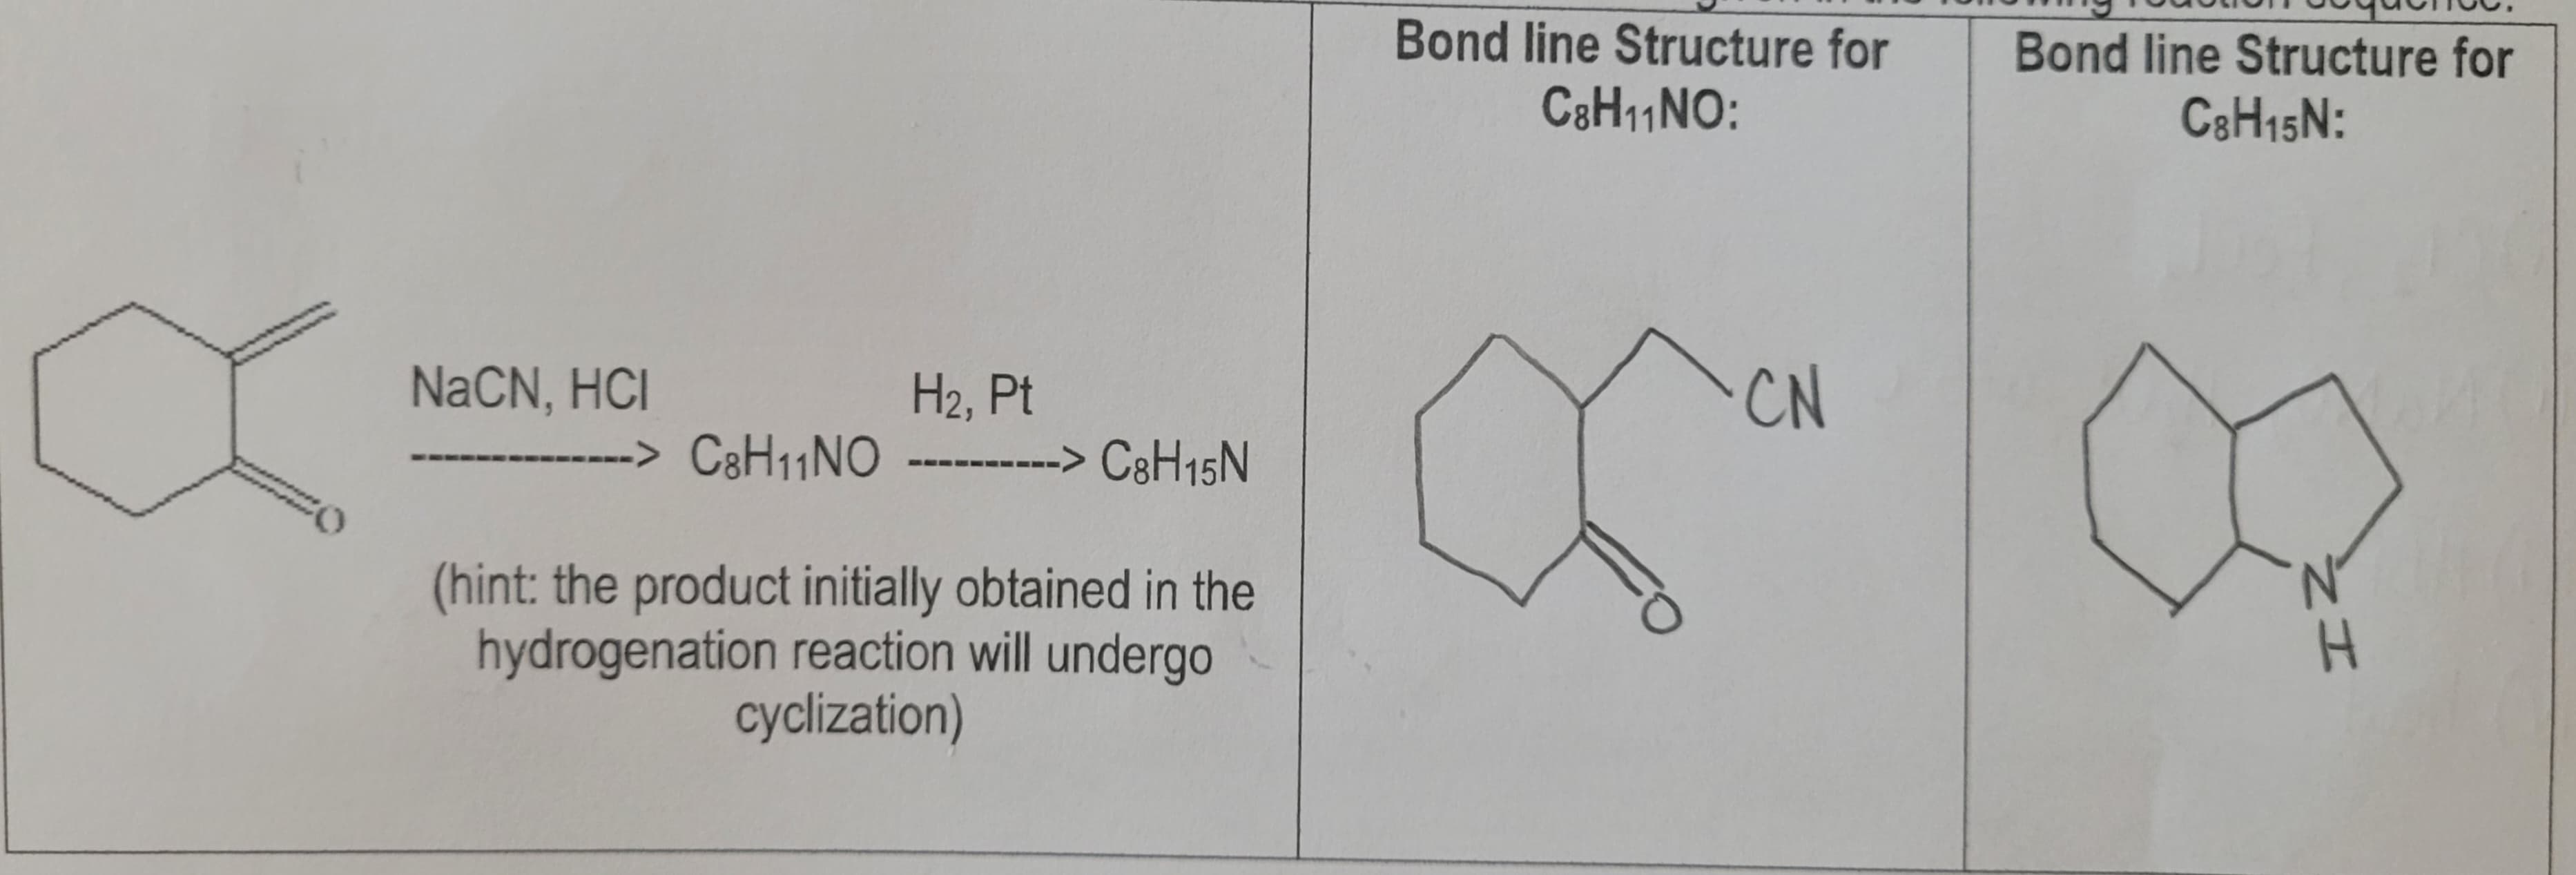 NaCN, HCI
------> C8H₁1NO
H₂, Pt
------> C8H15N
(hint: the product initially obtained in the
hydrogenation reaction will undergo
cyclization)
Bond line Structure for
C8H₁1NO:
FO
CN
Bond line Structure for
C8H15N:
H